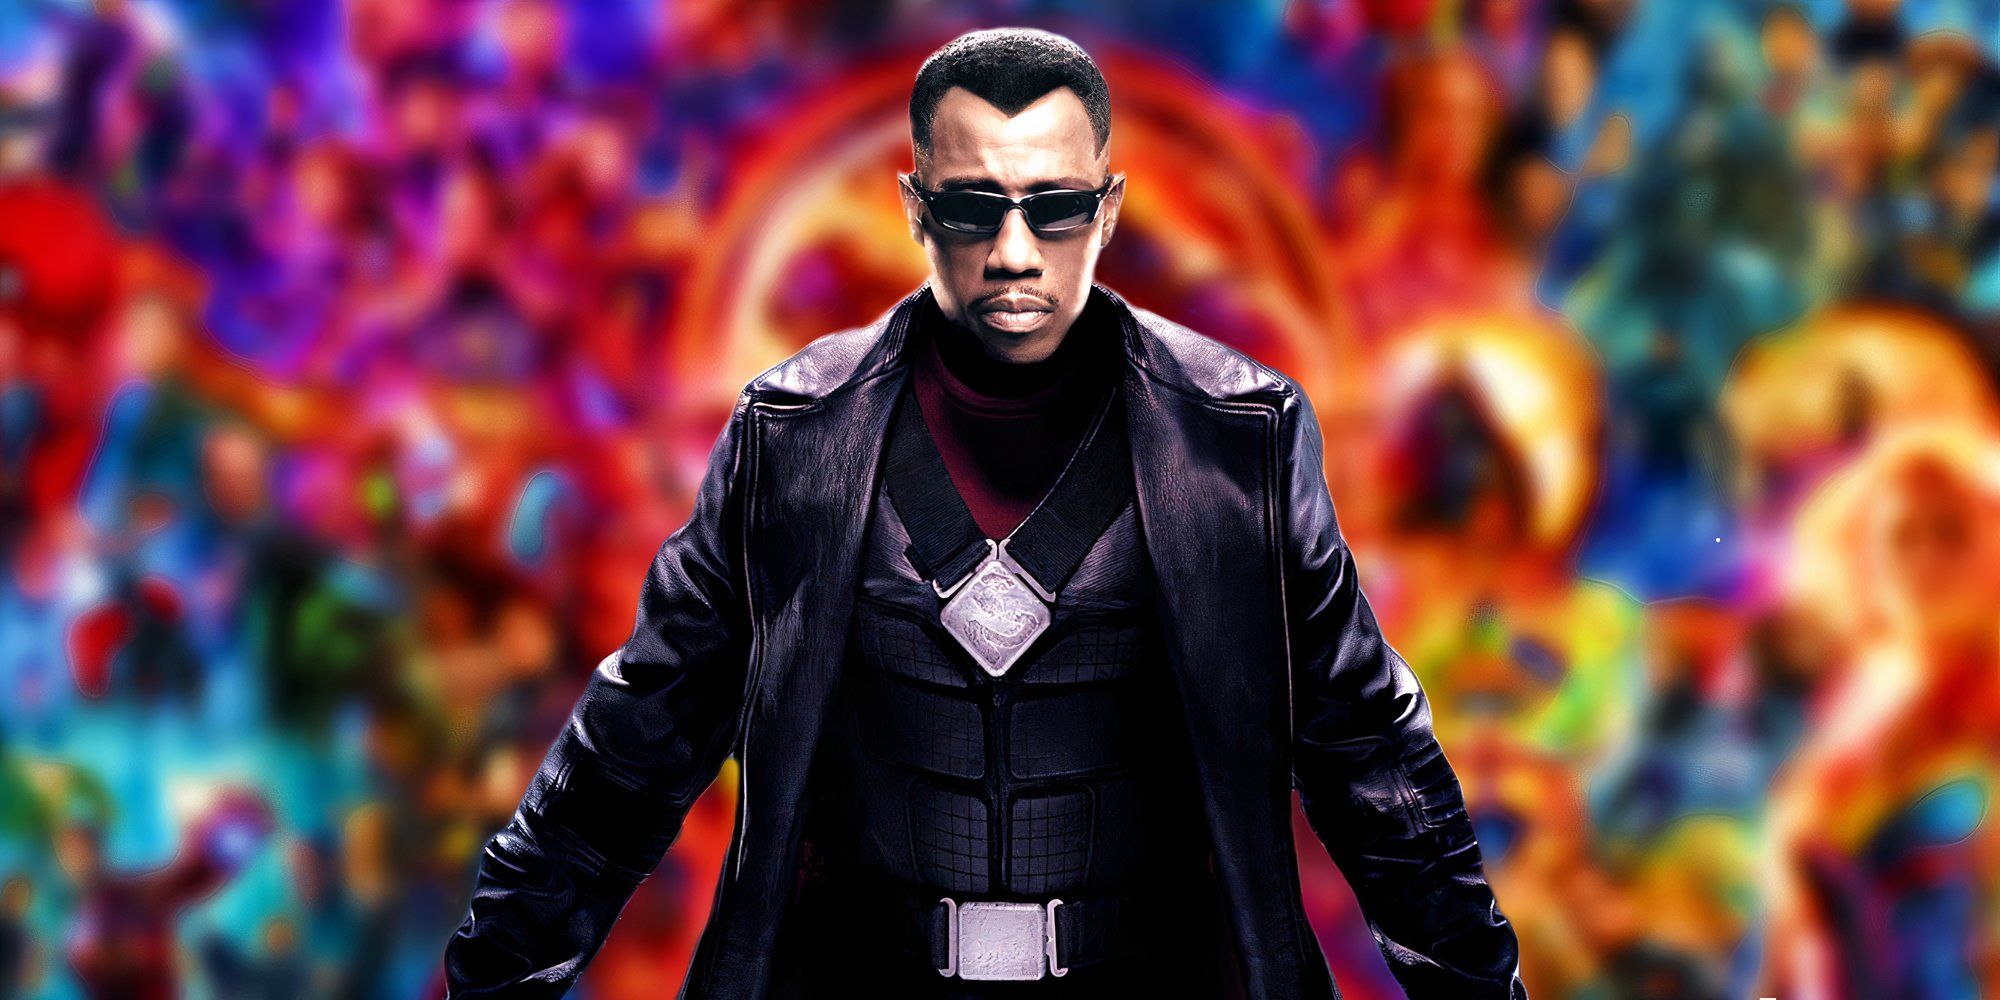 Wesley Snipes as Eric Brooks in the poster for Blade Trinity (2004) on top of a blurred image of the MCU's many movies